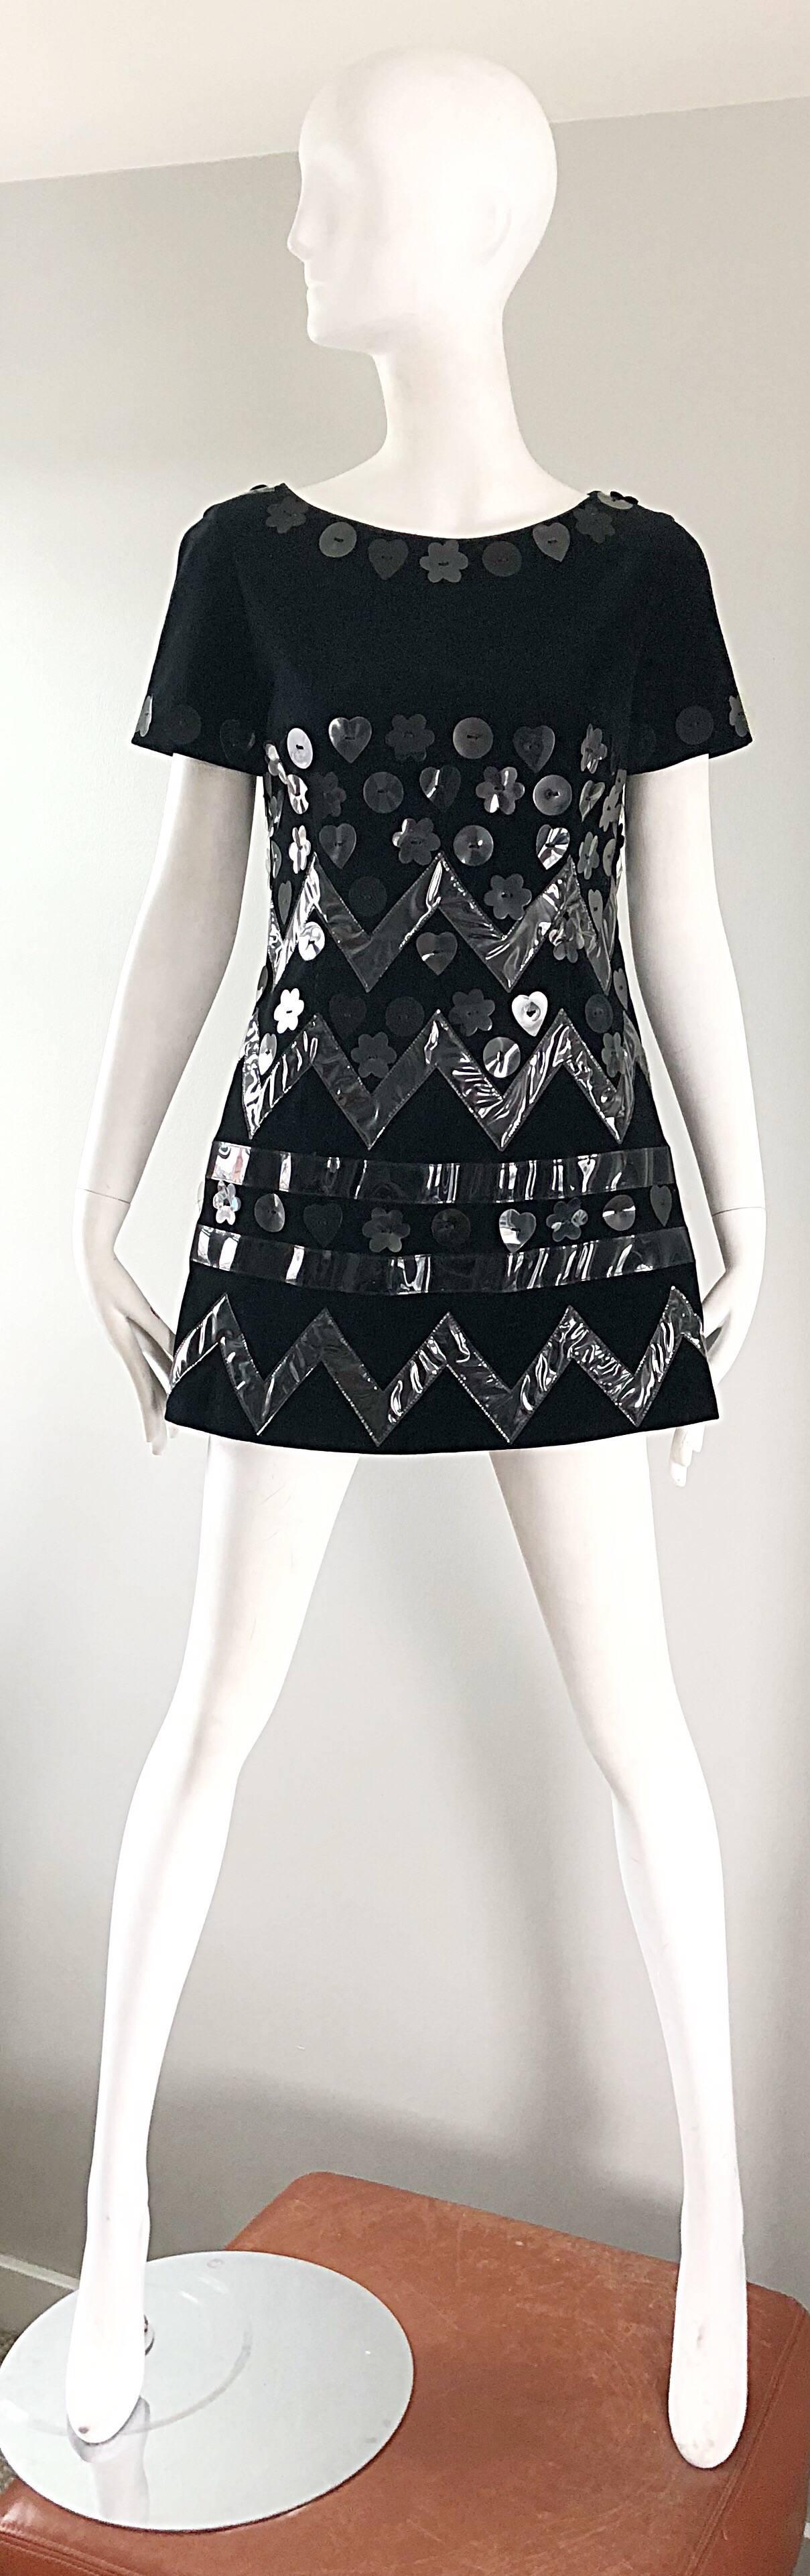 Incredible iconic 1990s does 1960s MOSCHINO Cheap and Chic black velvet and clear and black vinyl mini shift dress! Features hundreds of clear and black plastic pailette sequins in hearts, flowers and zig zags throughout. Wonderful tailored fit!